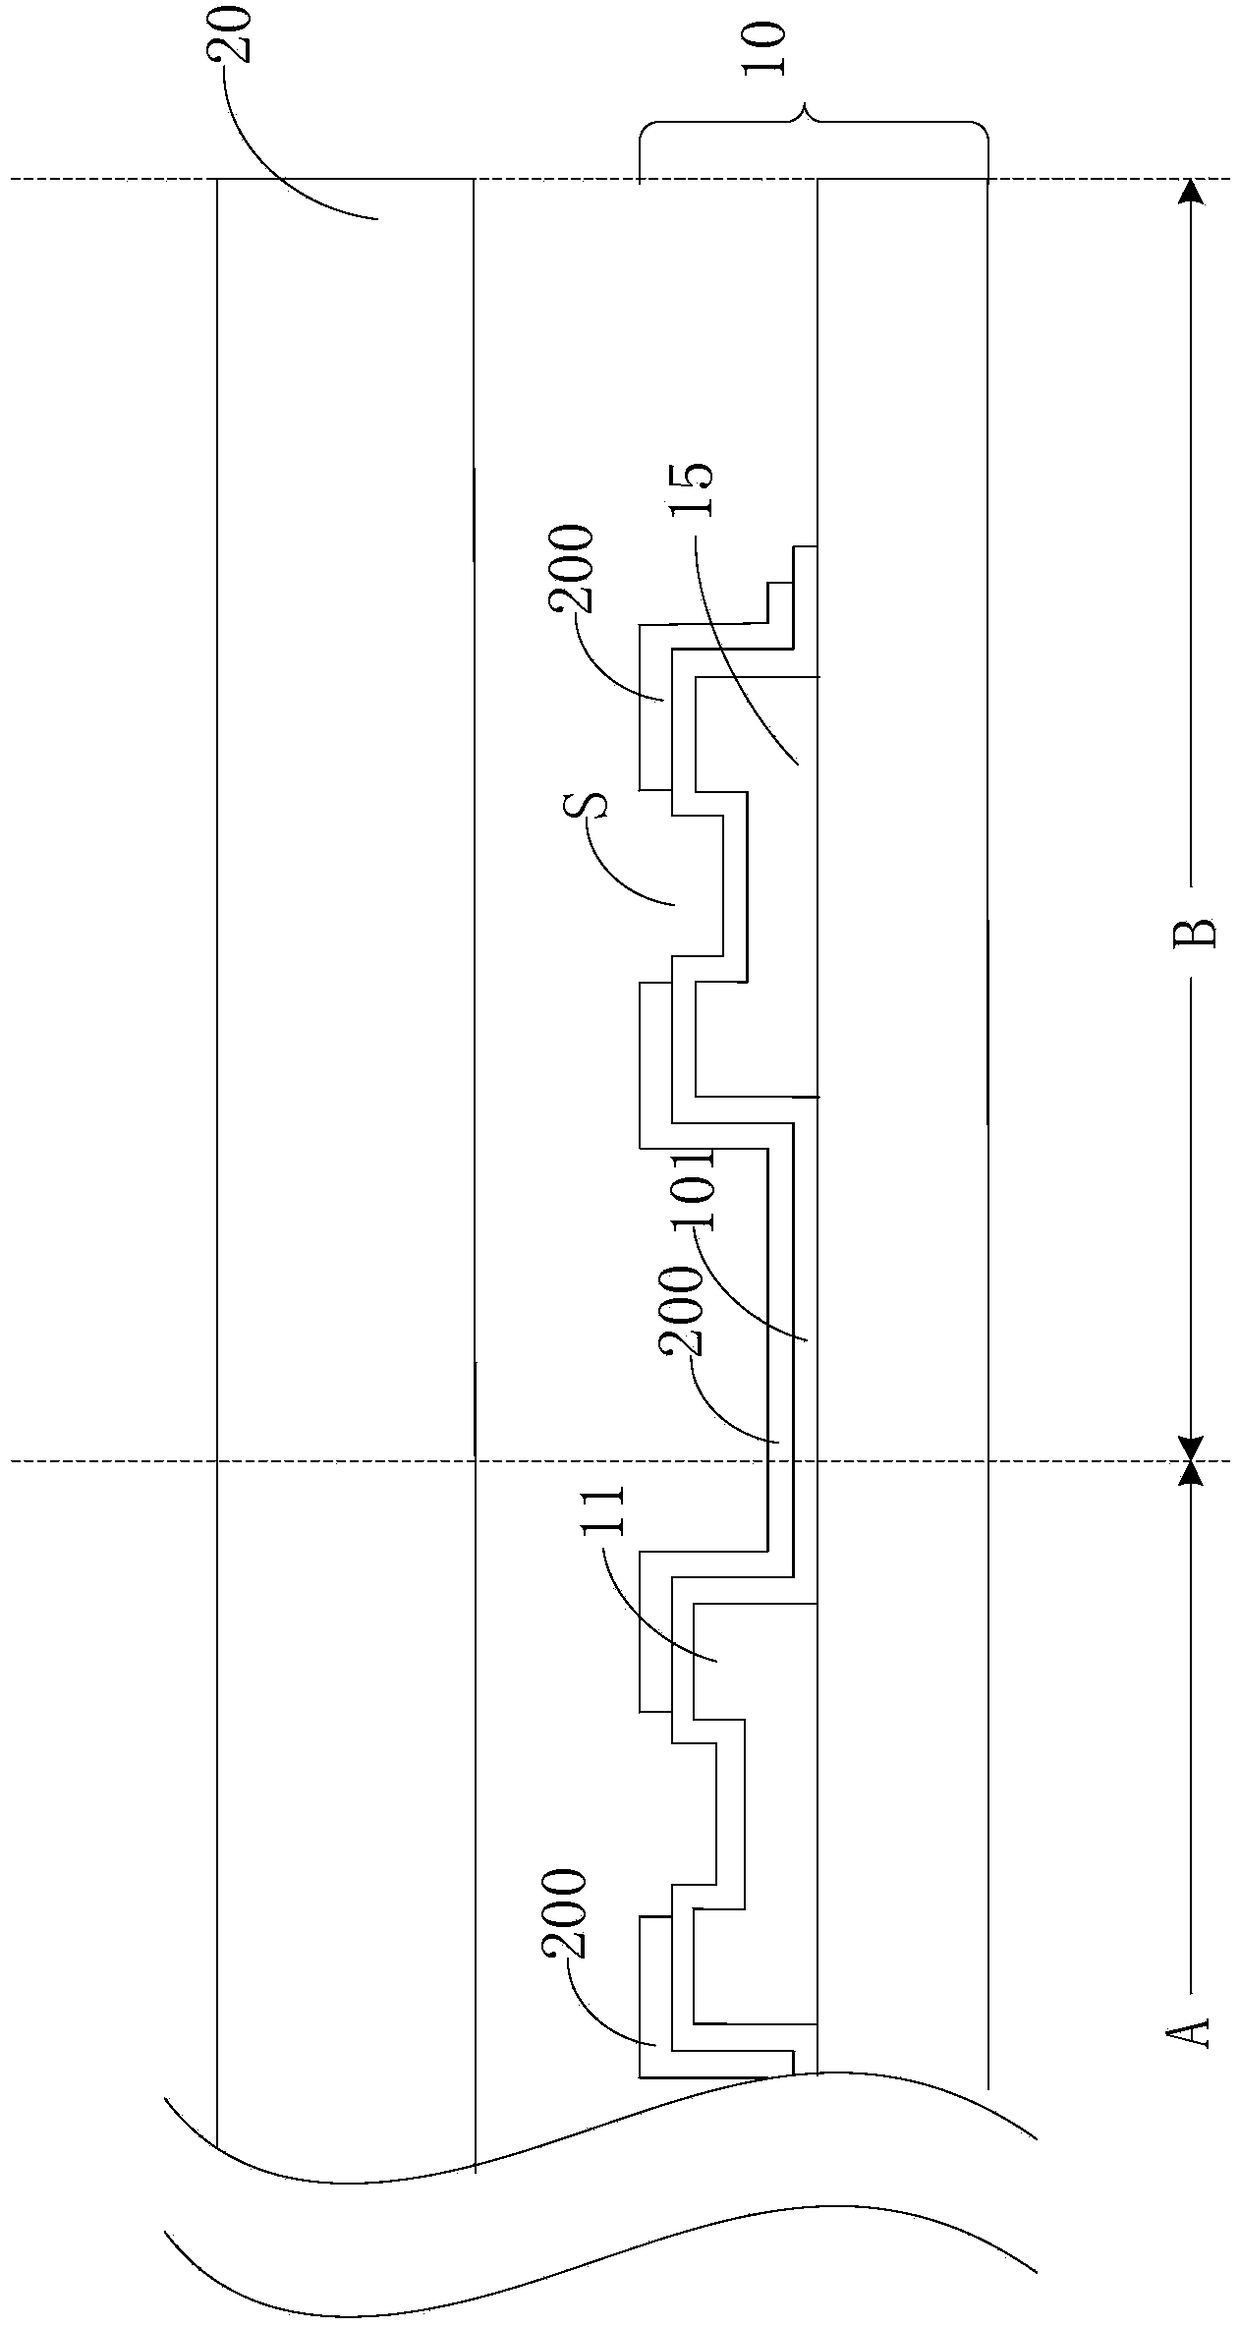 In-cell touch display and touch display device